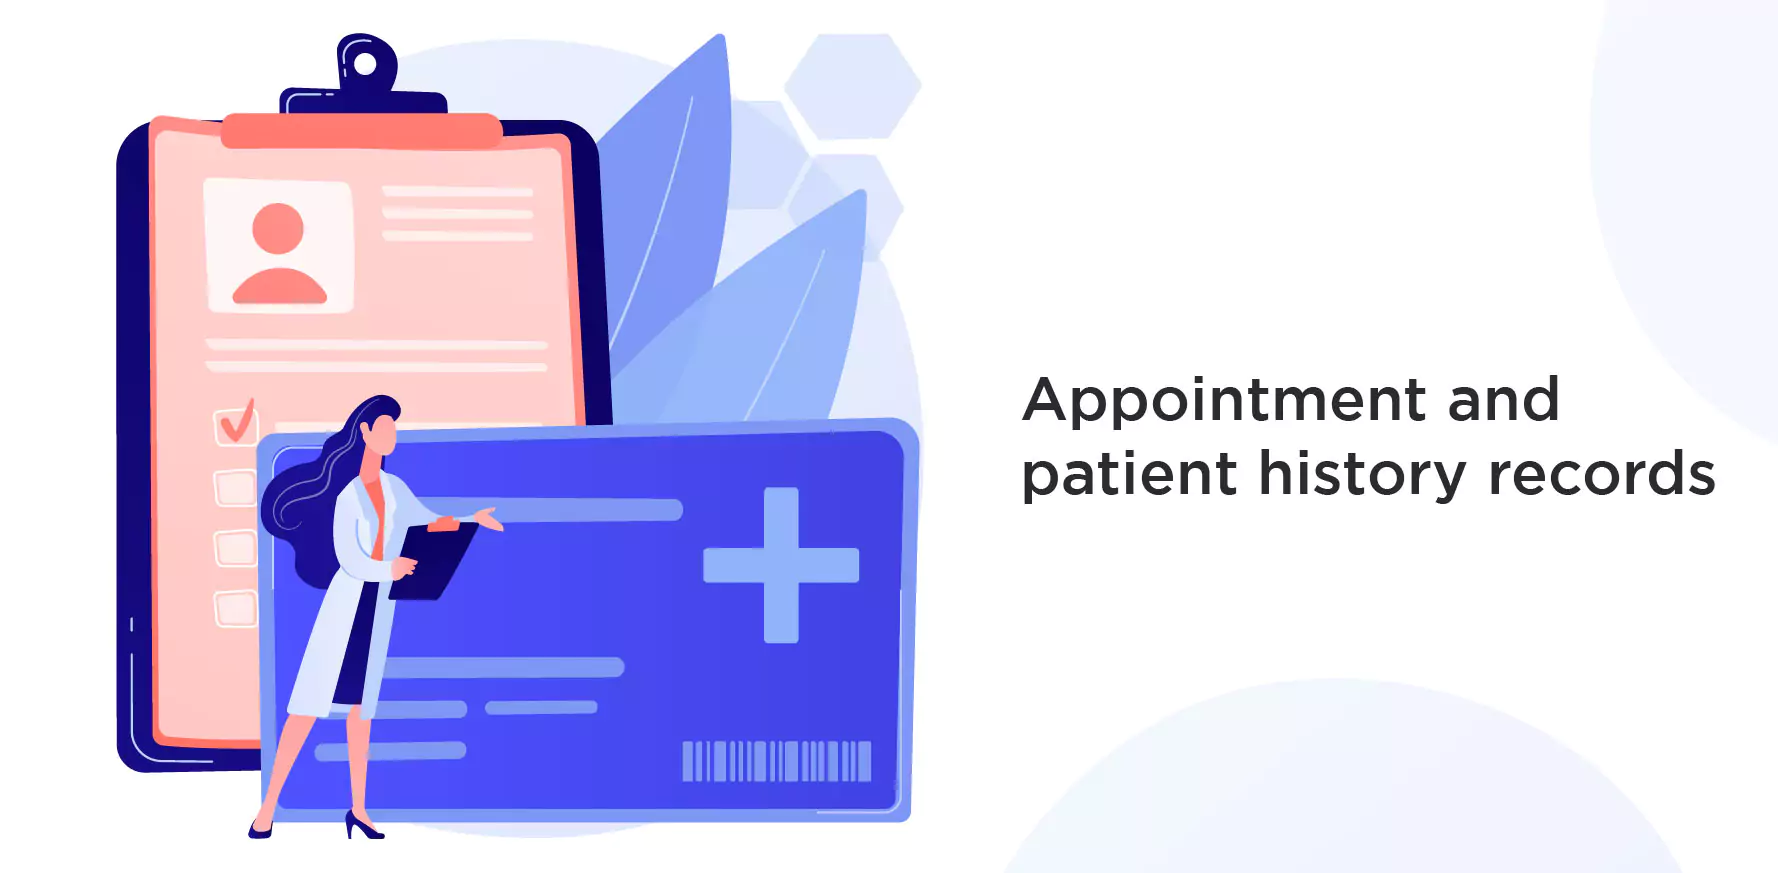 Appointment and patient history records